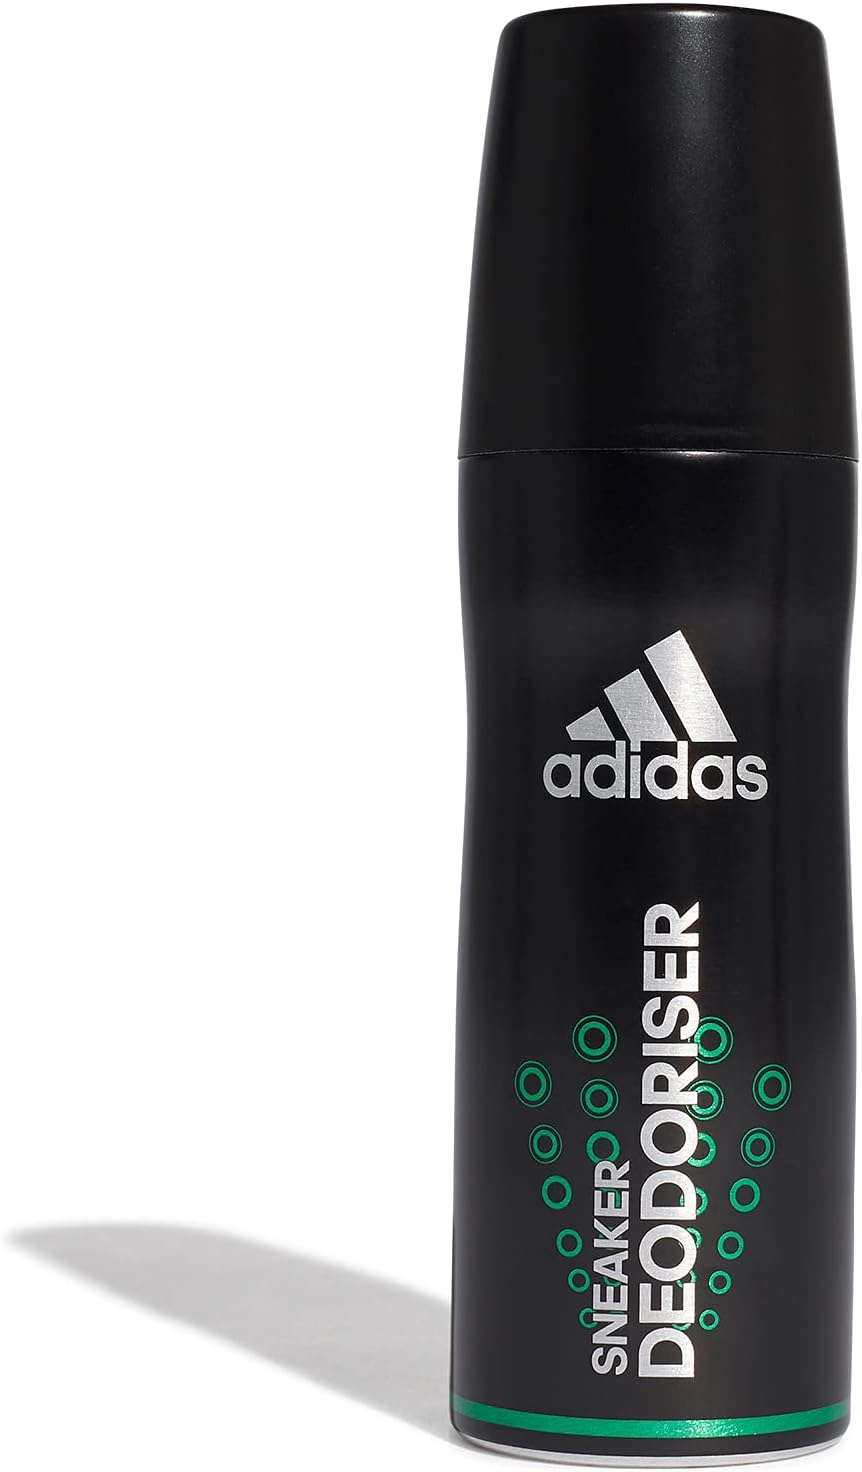 adidas Sneaker and Shoe Deodorizer with Citrus Scent- [...]